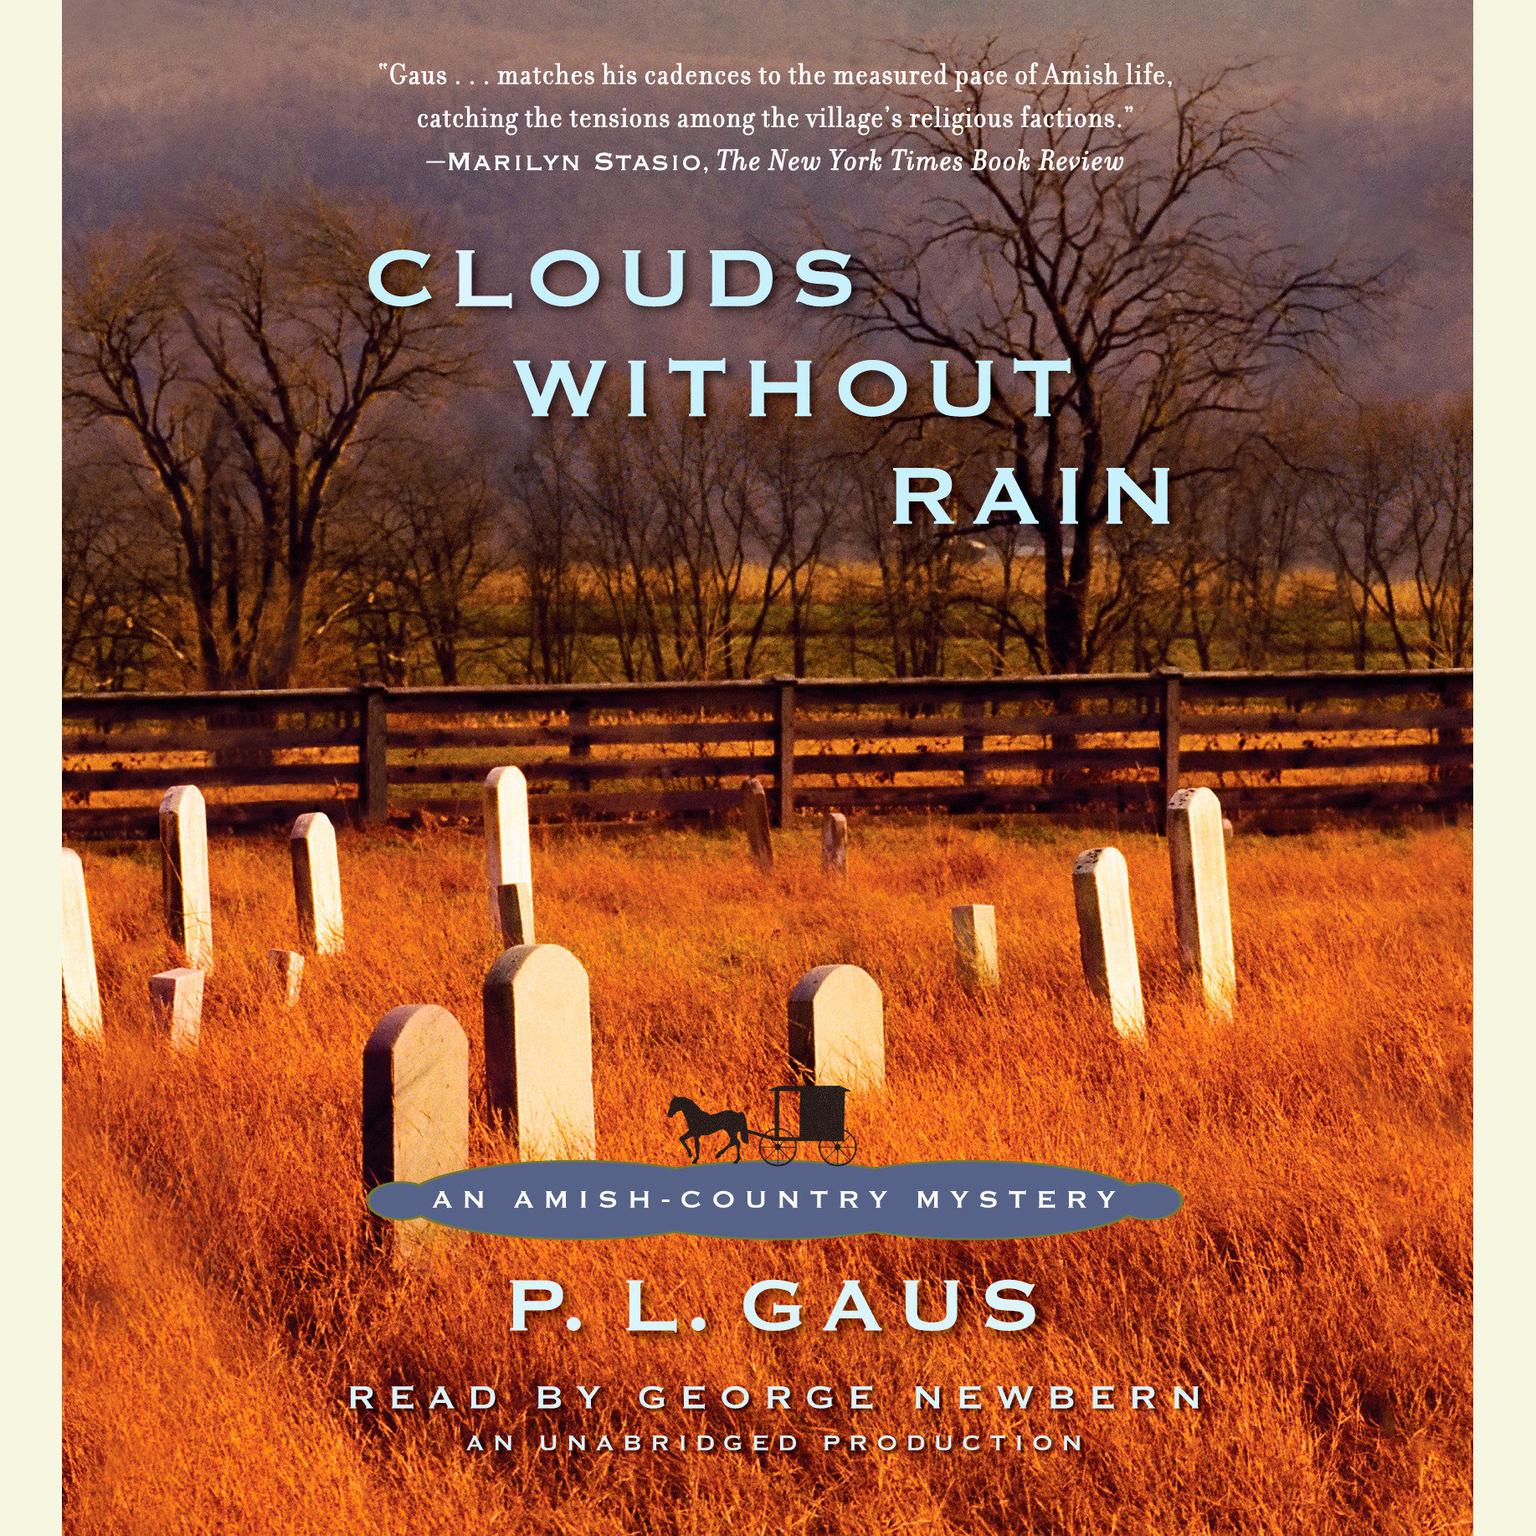 Clouds Without Rain: An Amish-Country Mystery (#3) Audiobook, by P. L. Gaus